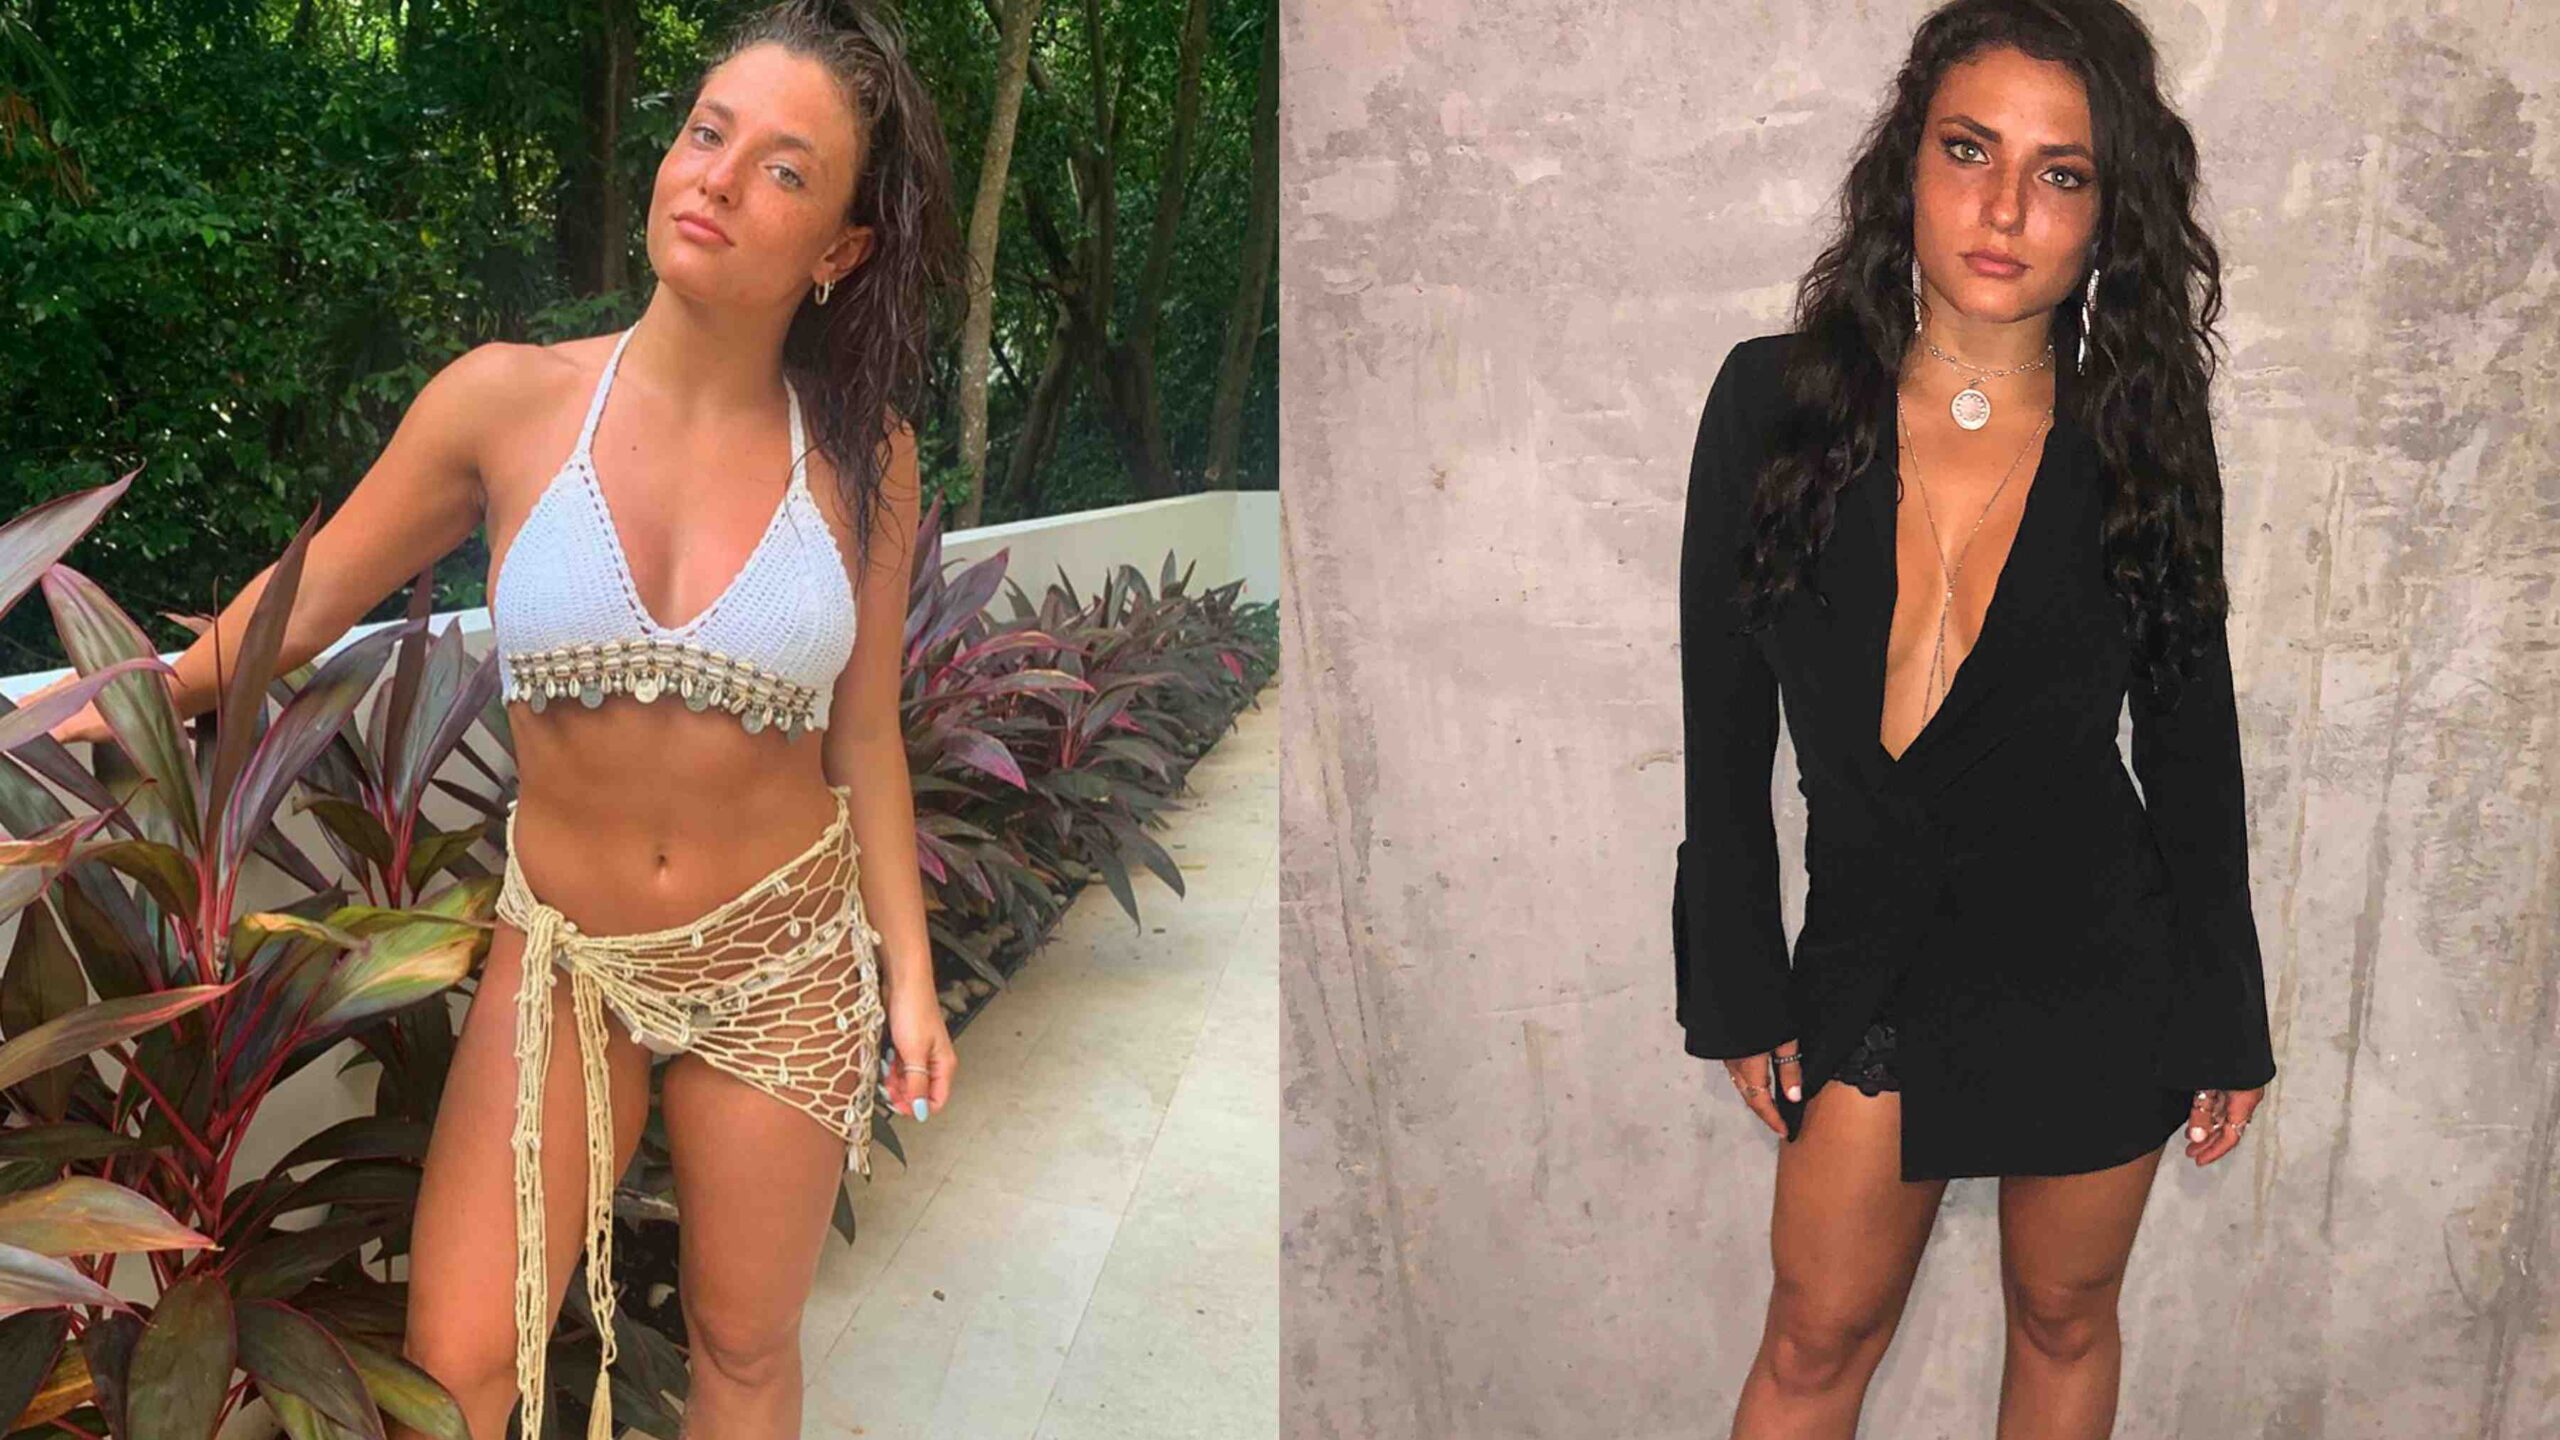 Jade Chynoweth Top Most Liked Pictures On Instagram Moneyscotch